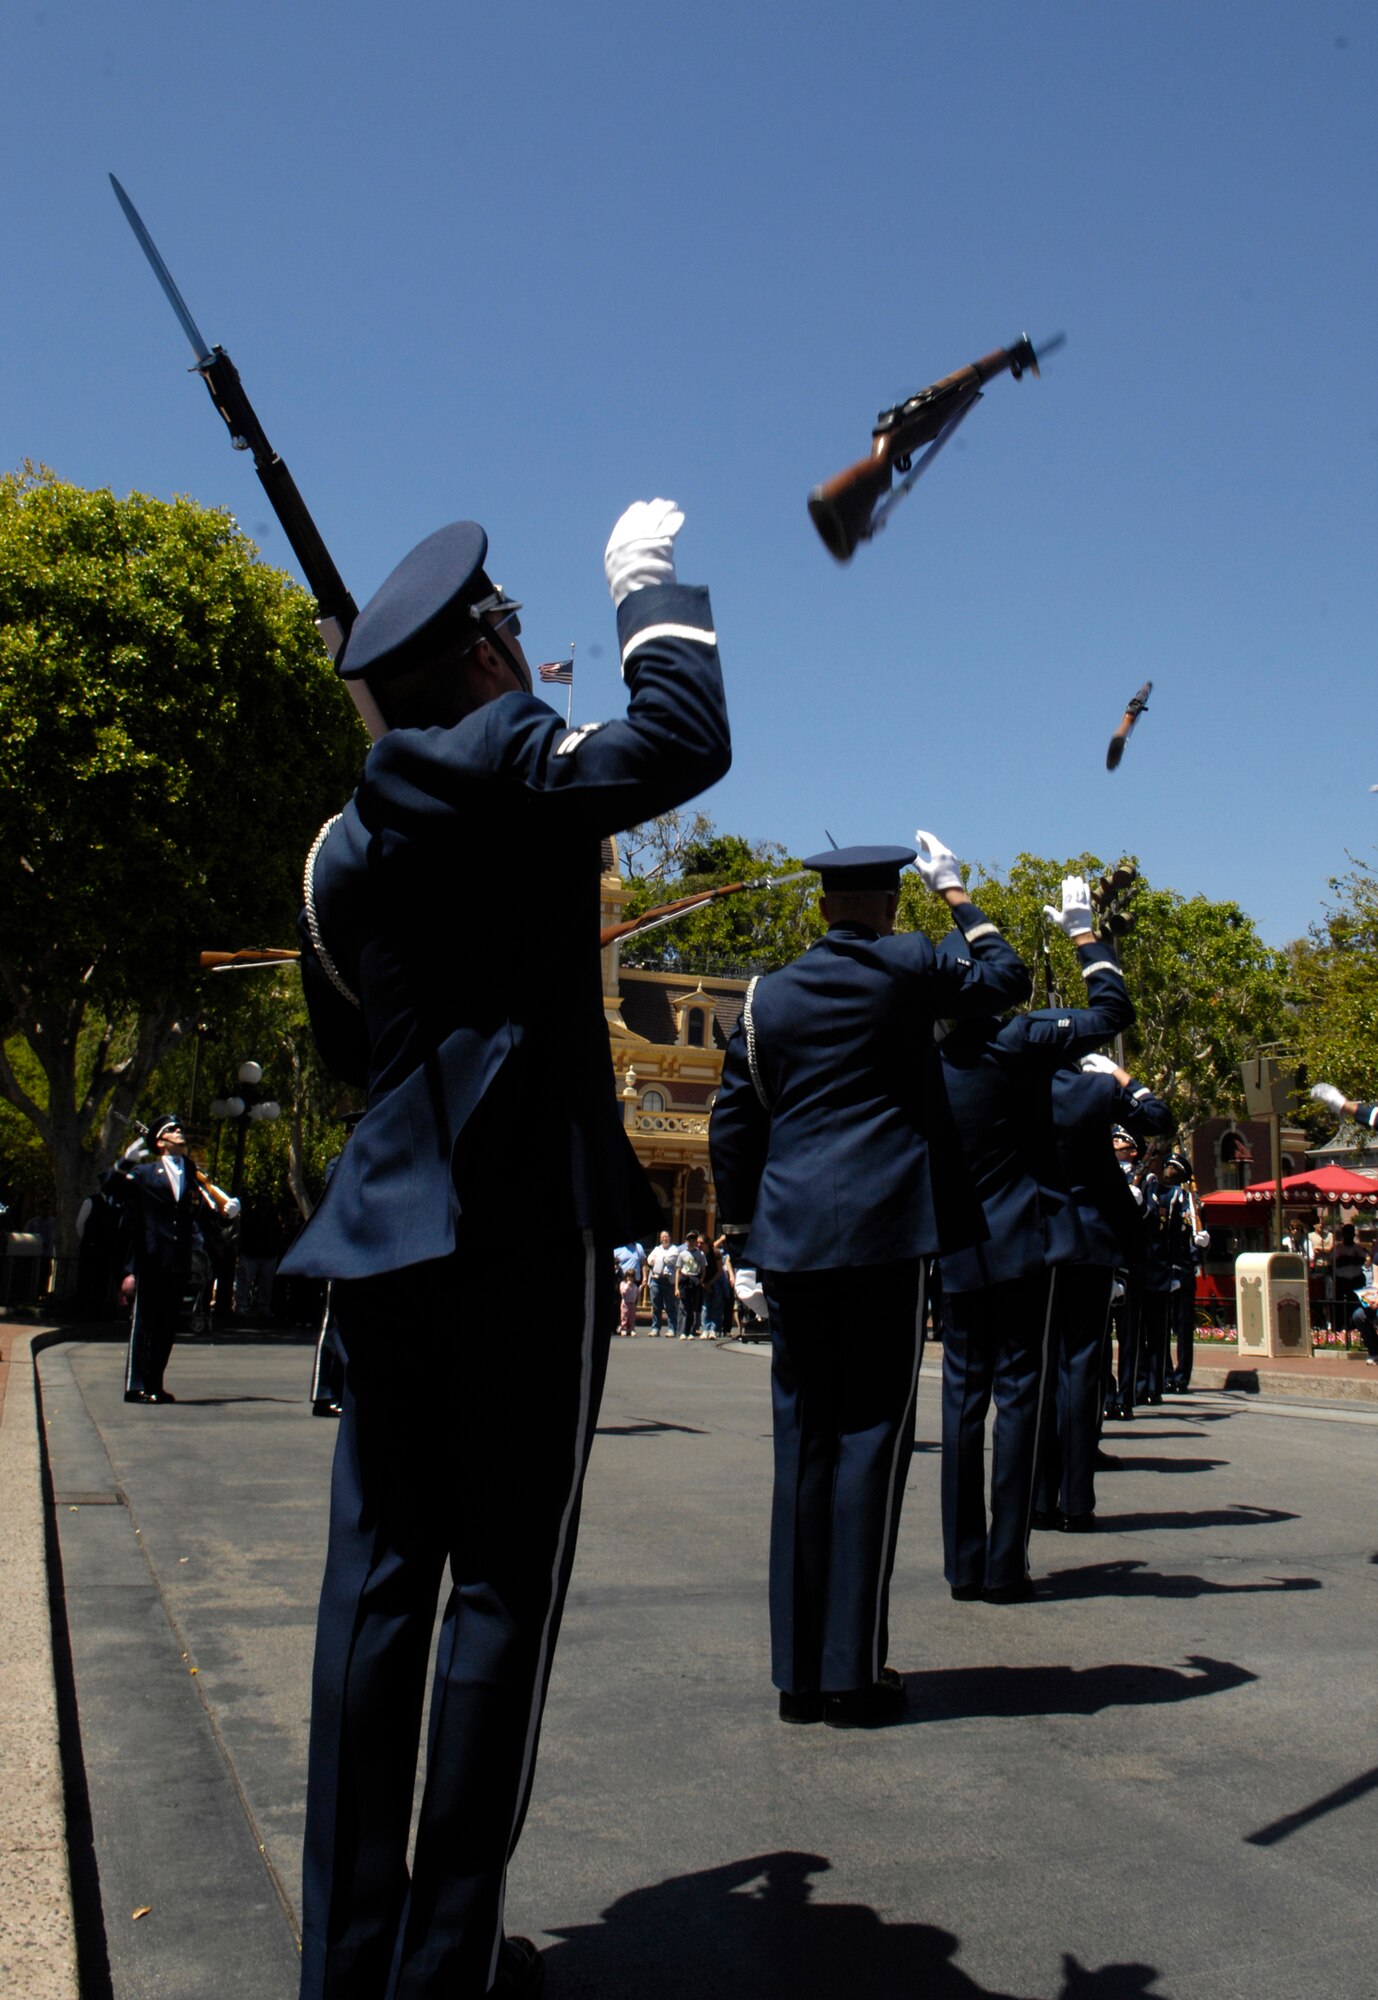 The Air Force Honor Guard Drill Team performs the newly added 'X-mix' maneuver in their 16 Man drill performance at Disneyland Resort in Aneheim, Calif., 18 April 2007. The Drill Team is the traveling component of the Air Force Honor Guard and tours Air Force bases world wide showcasing the precision of today's Air Force to recruit, retain, and inspire Airmen for the Air Force mission. (U.S. Air Force photo by Senior Airman Daniel R. DeCook)(Released)